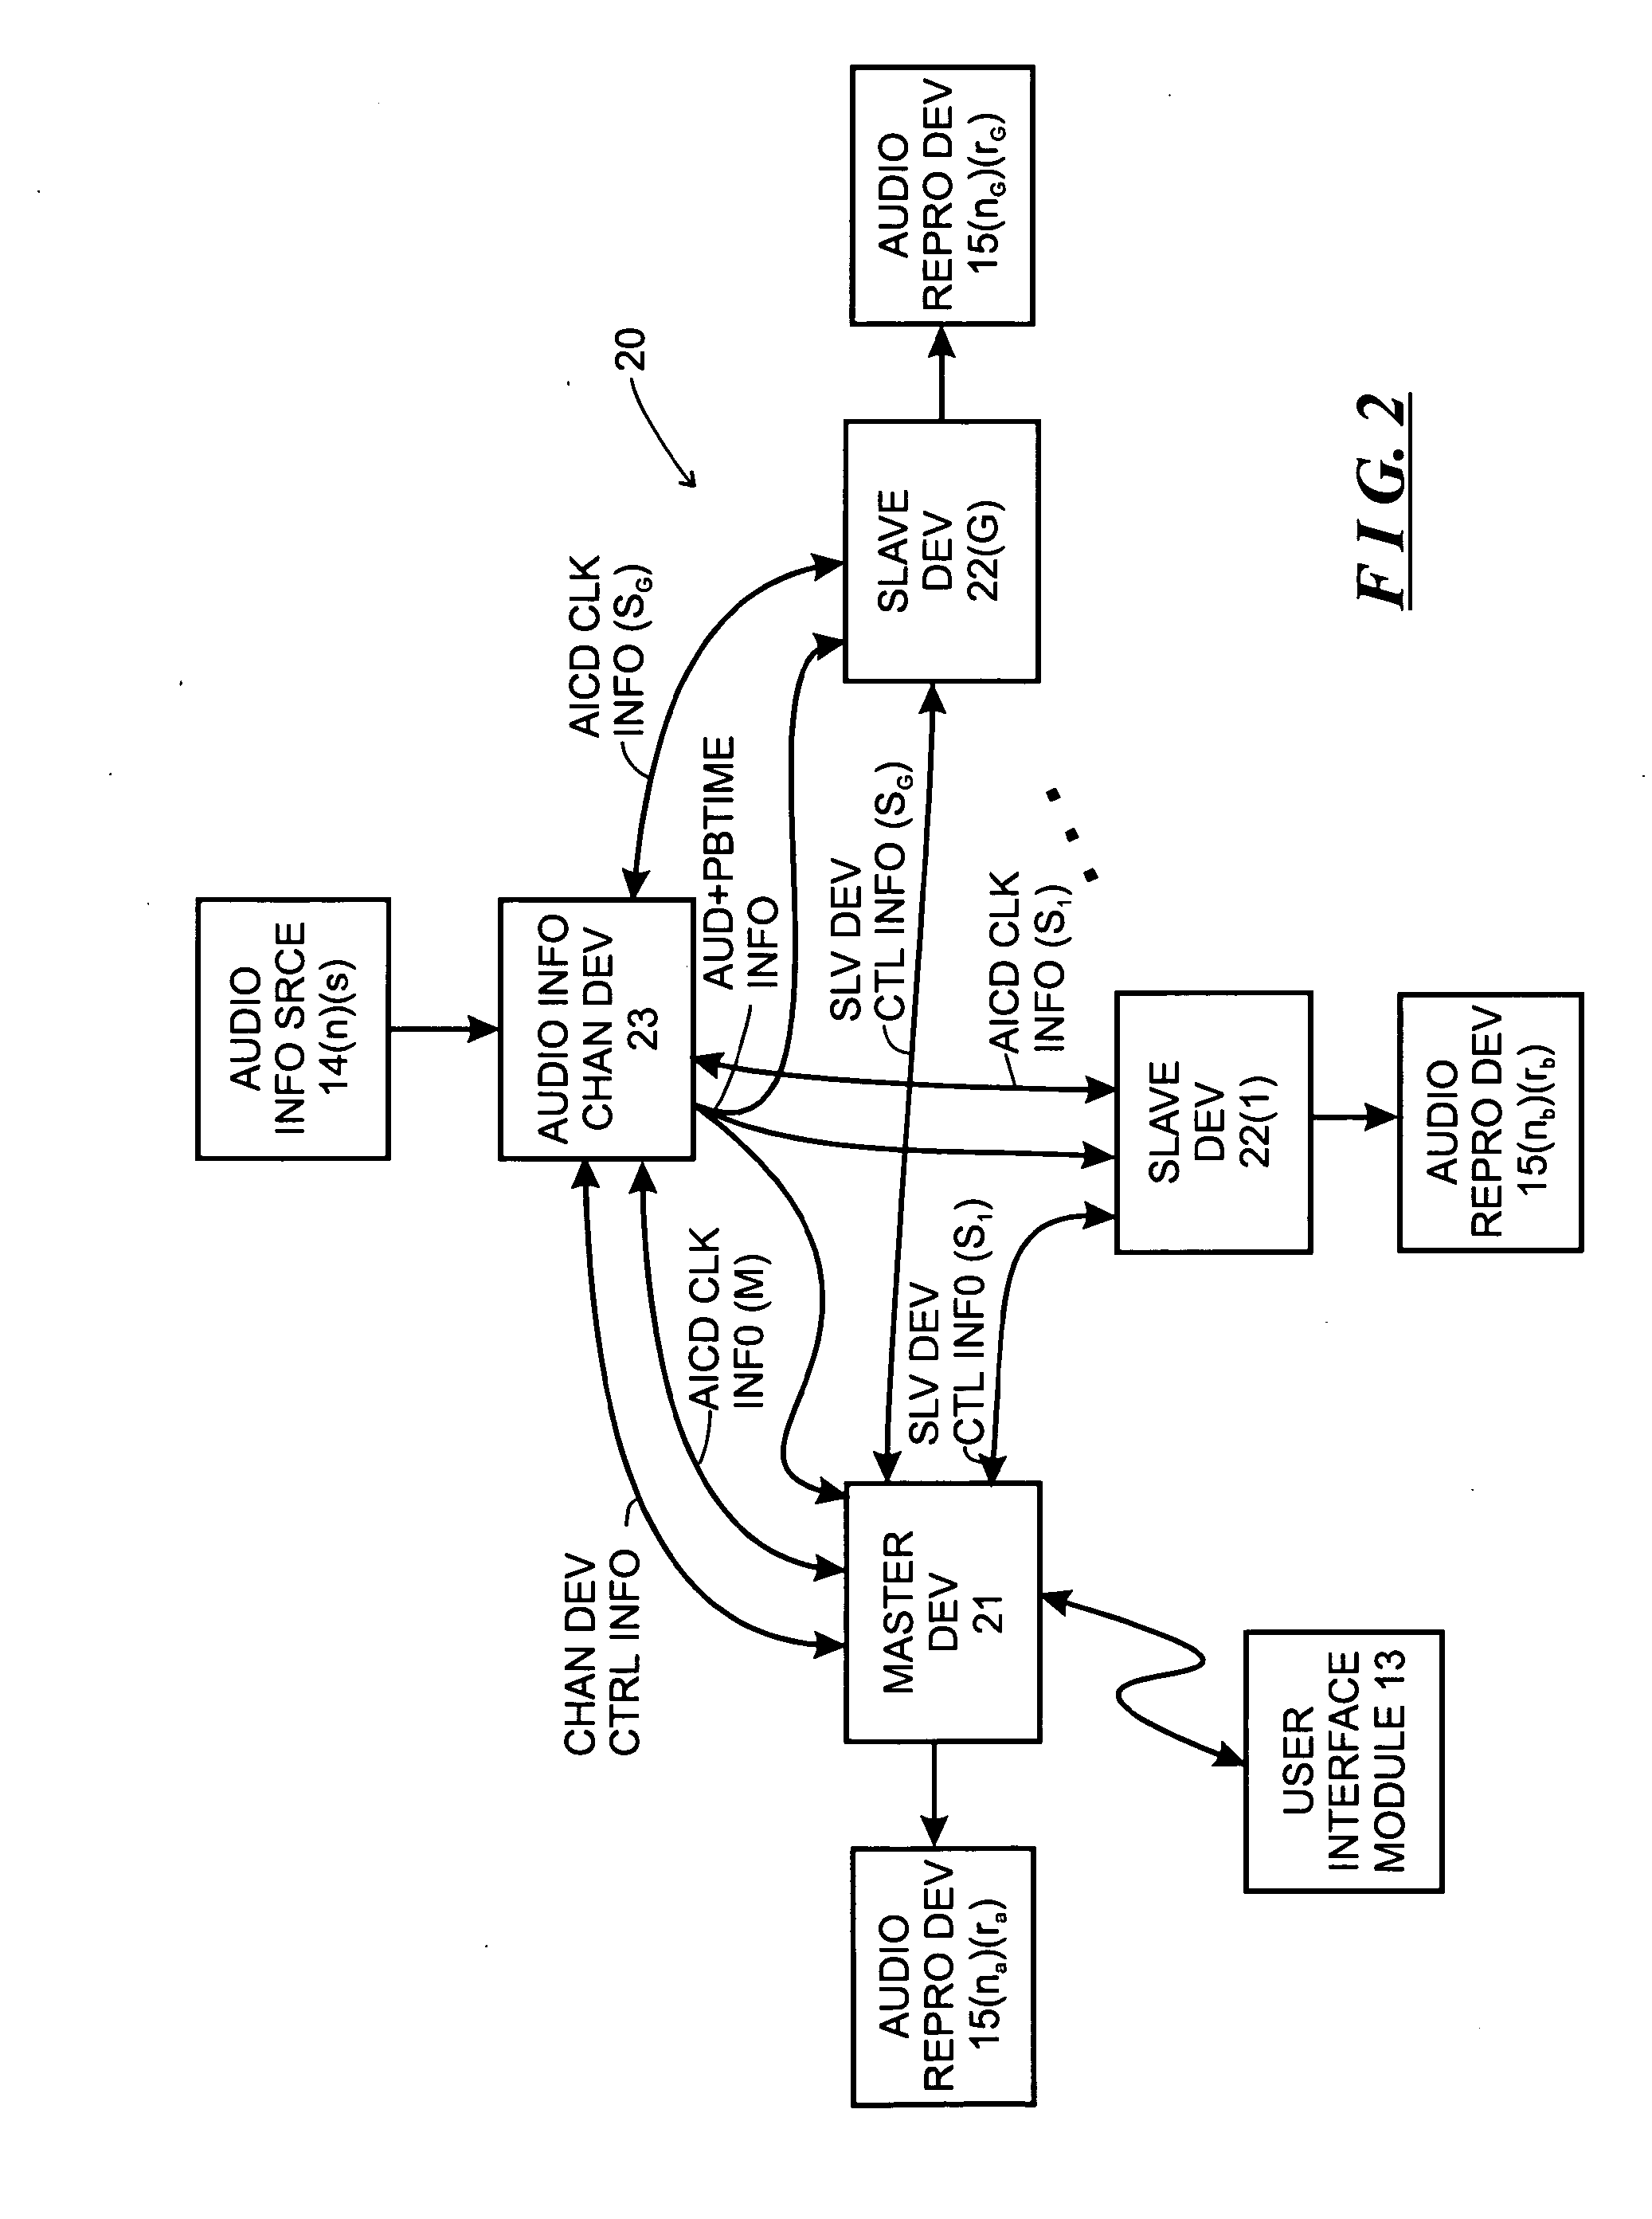 System and Method for Synchronizing Operations Among a Plurality of Independently Clocked Digital Data Processing Devices